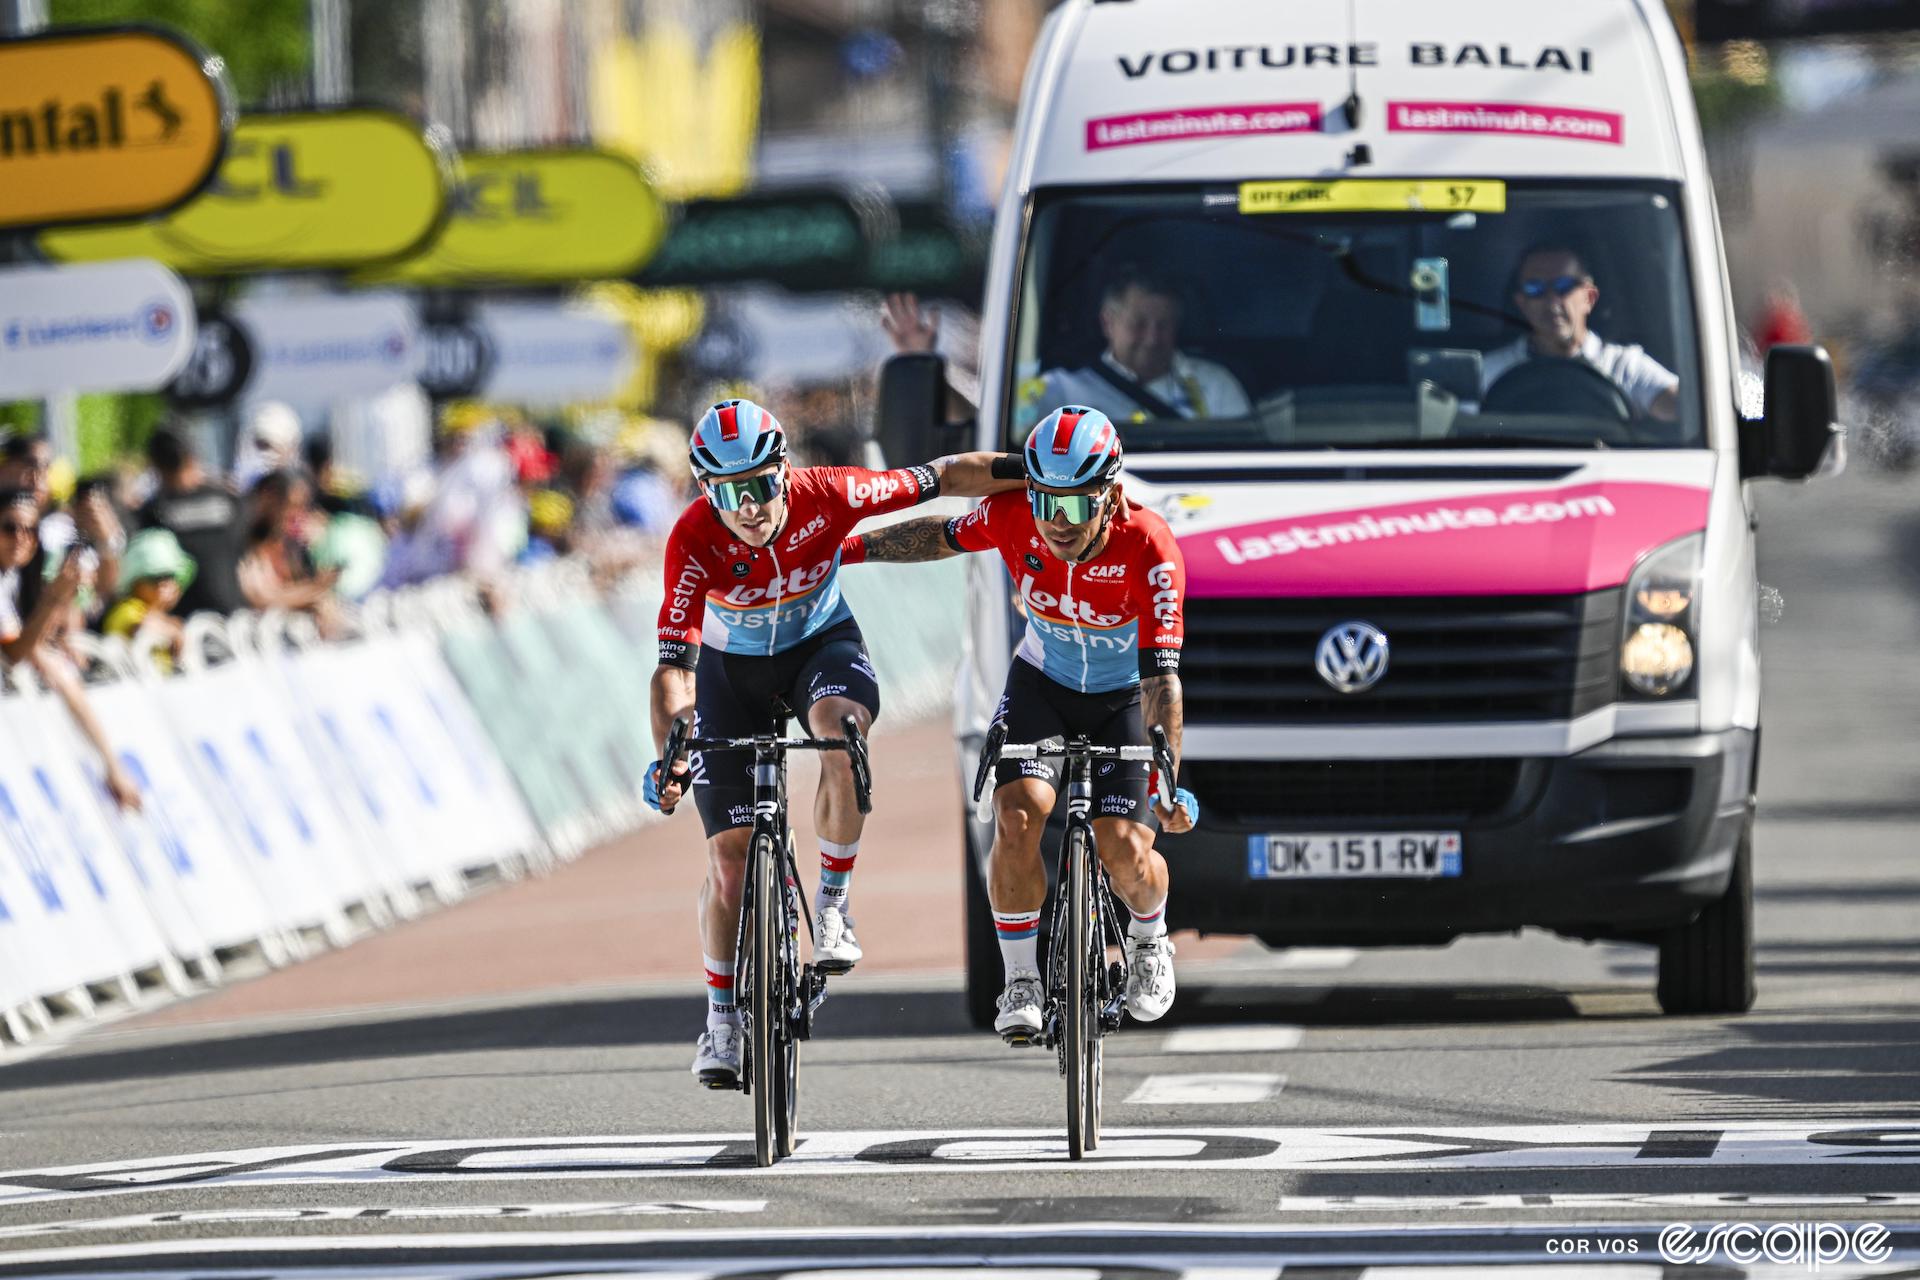 Caleb Ewan and Jasper De Buyst cross the finish line at the Tour de France, arms around each other, with the 'broom wagon' right behind them.